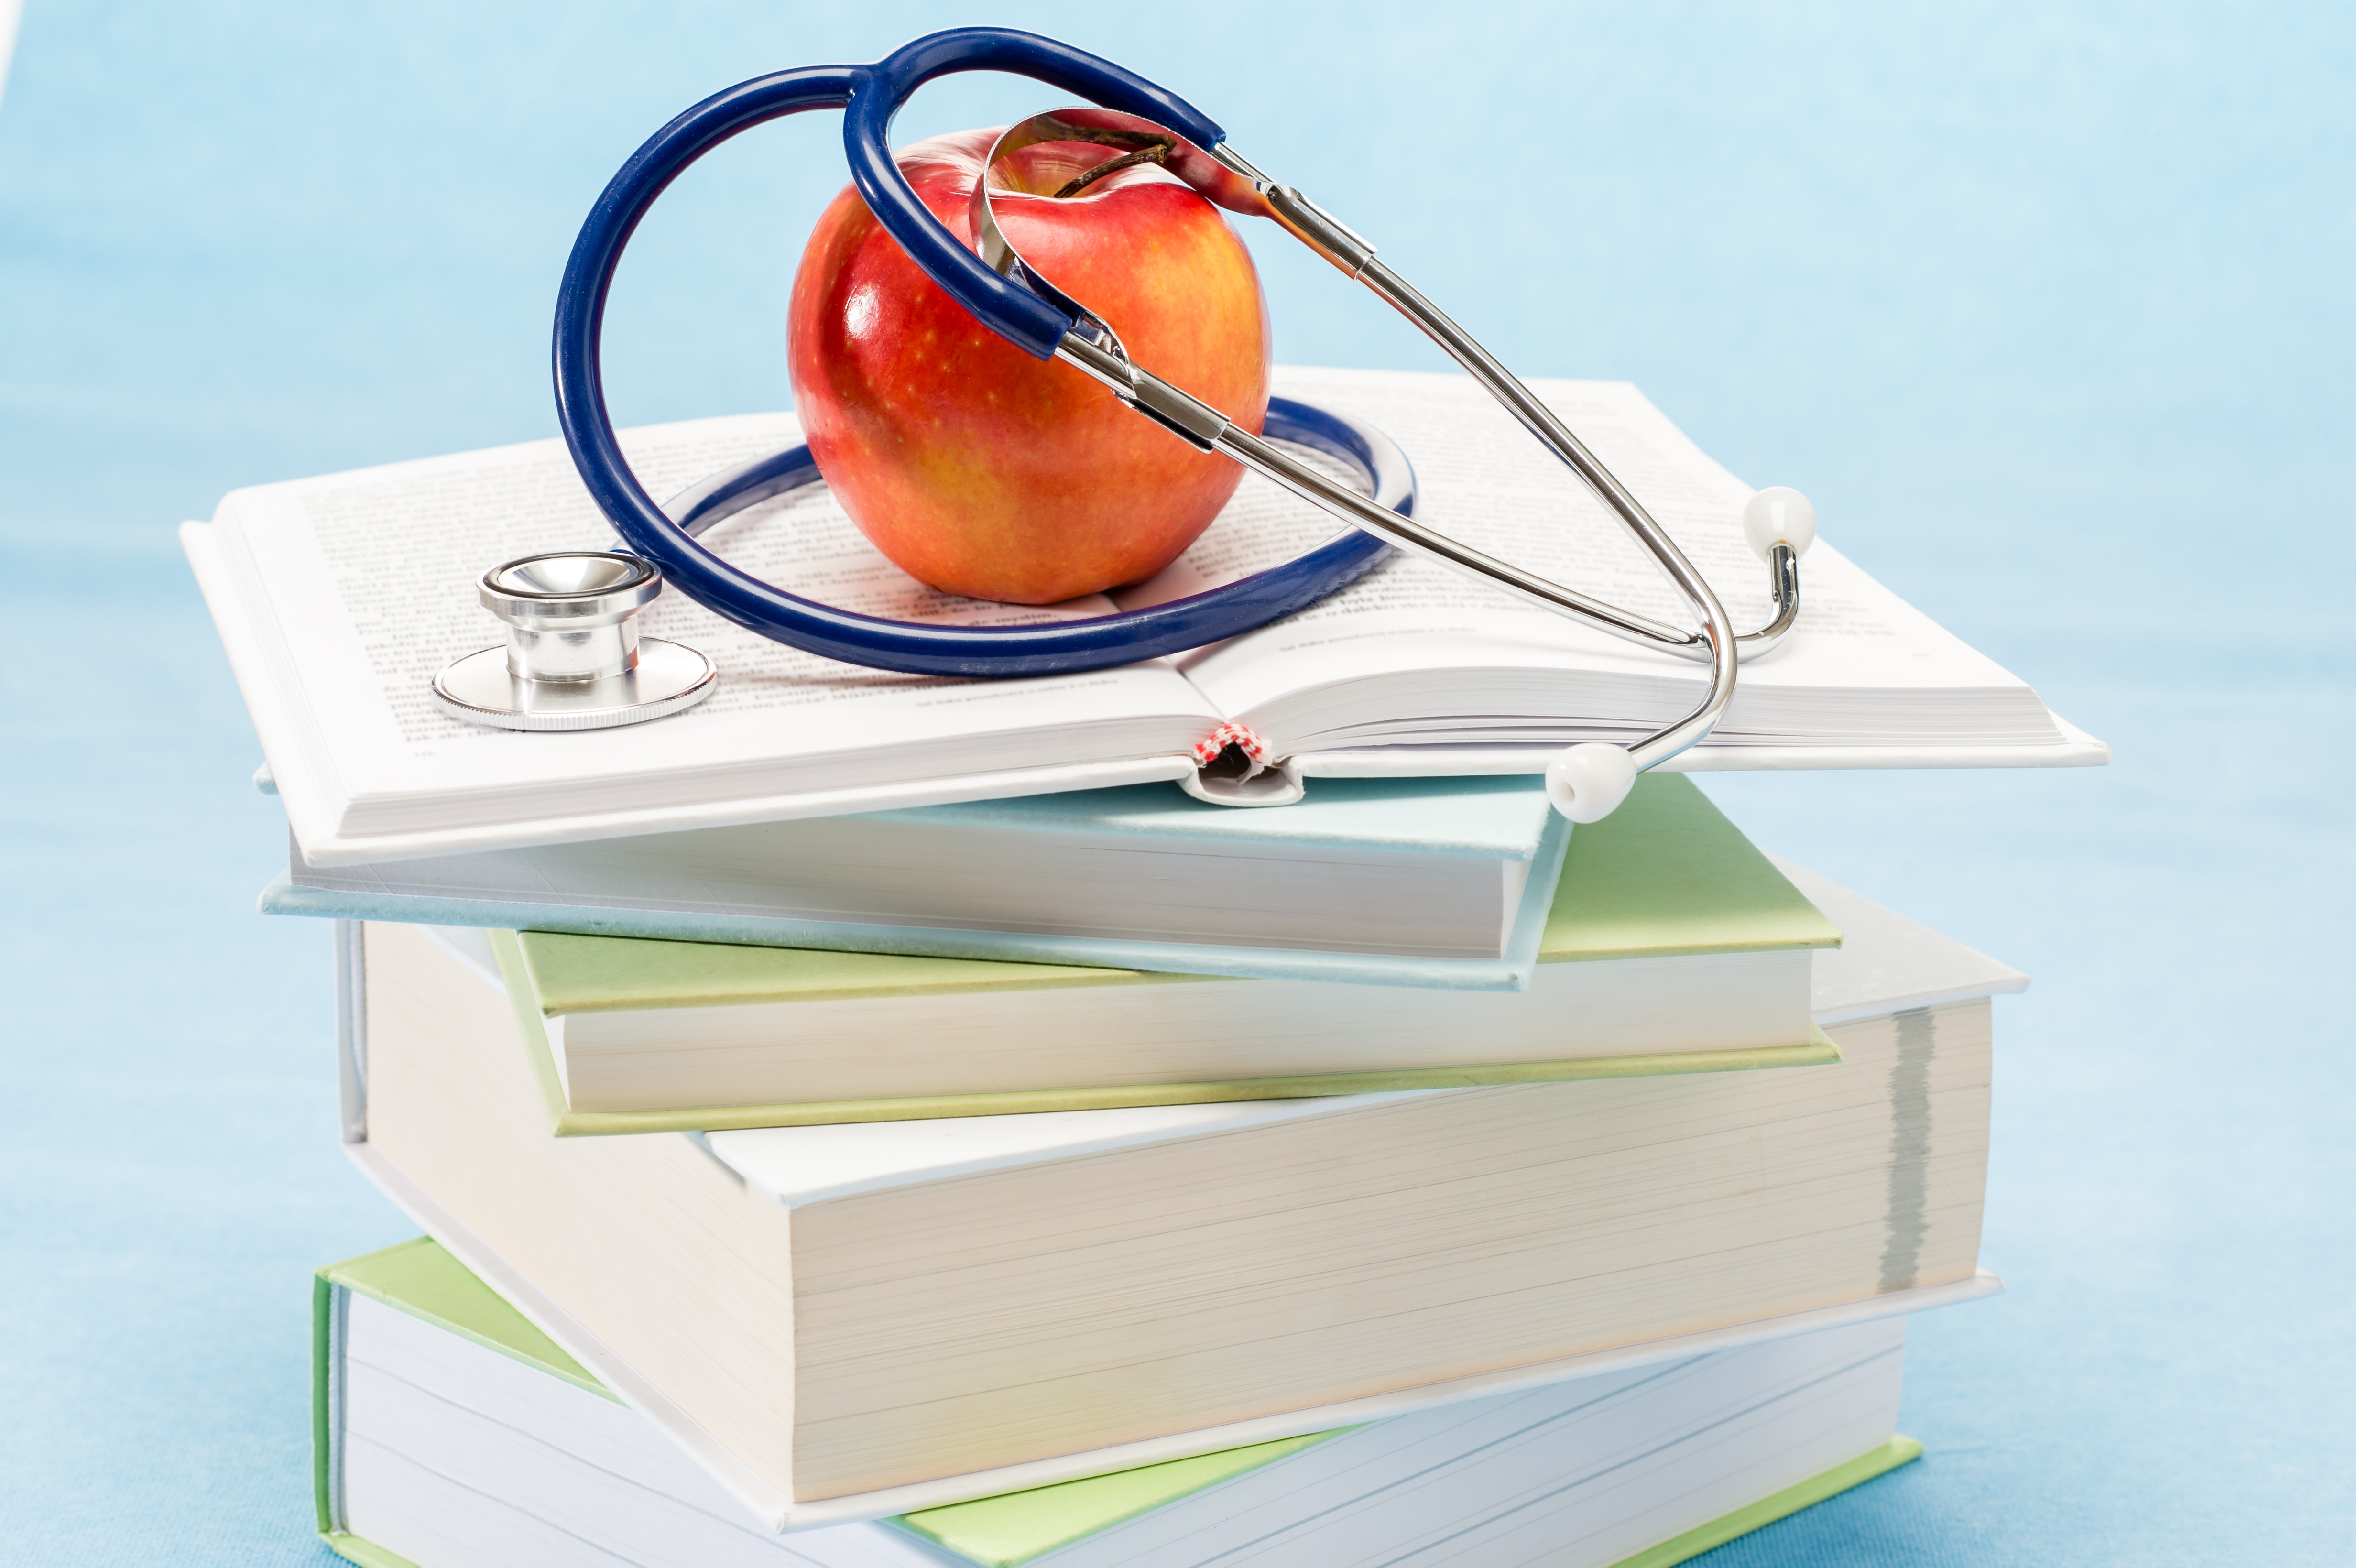 Medical Books stacked with Apple on Top